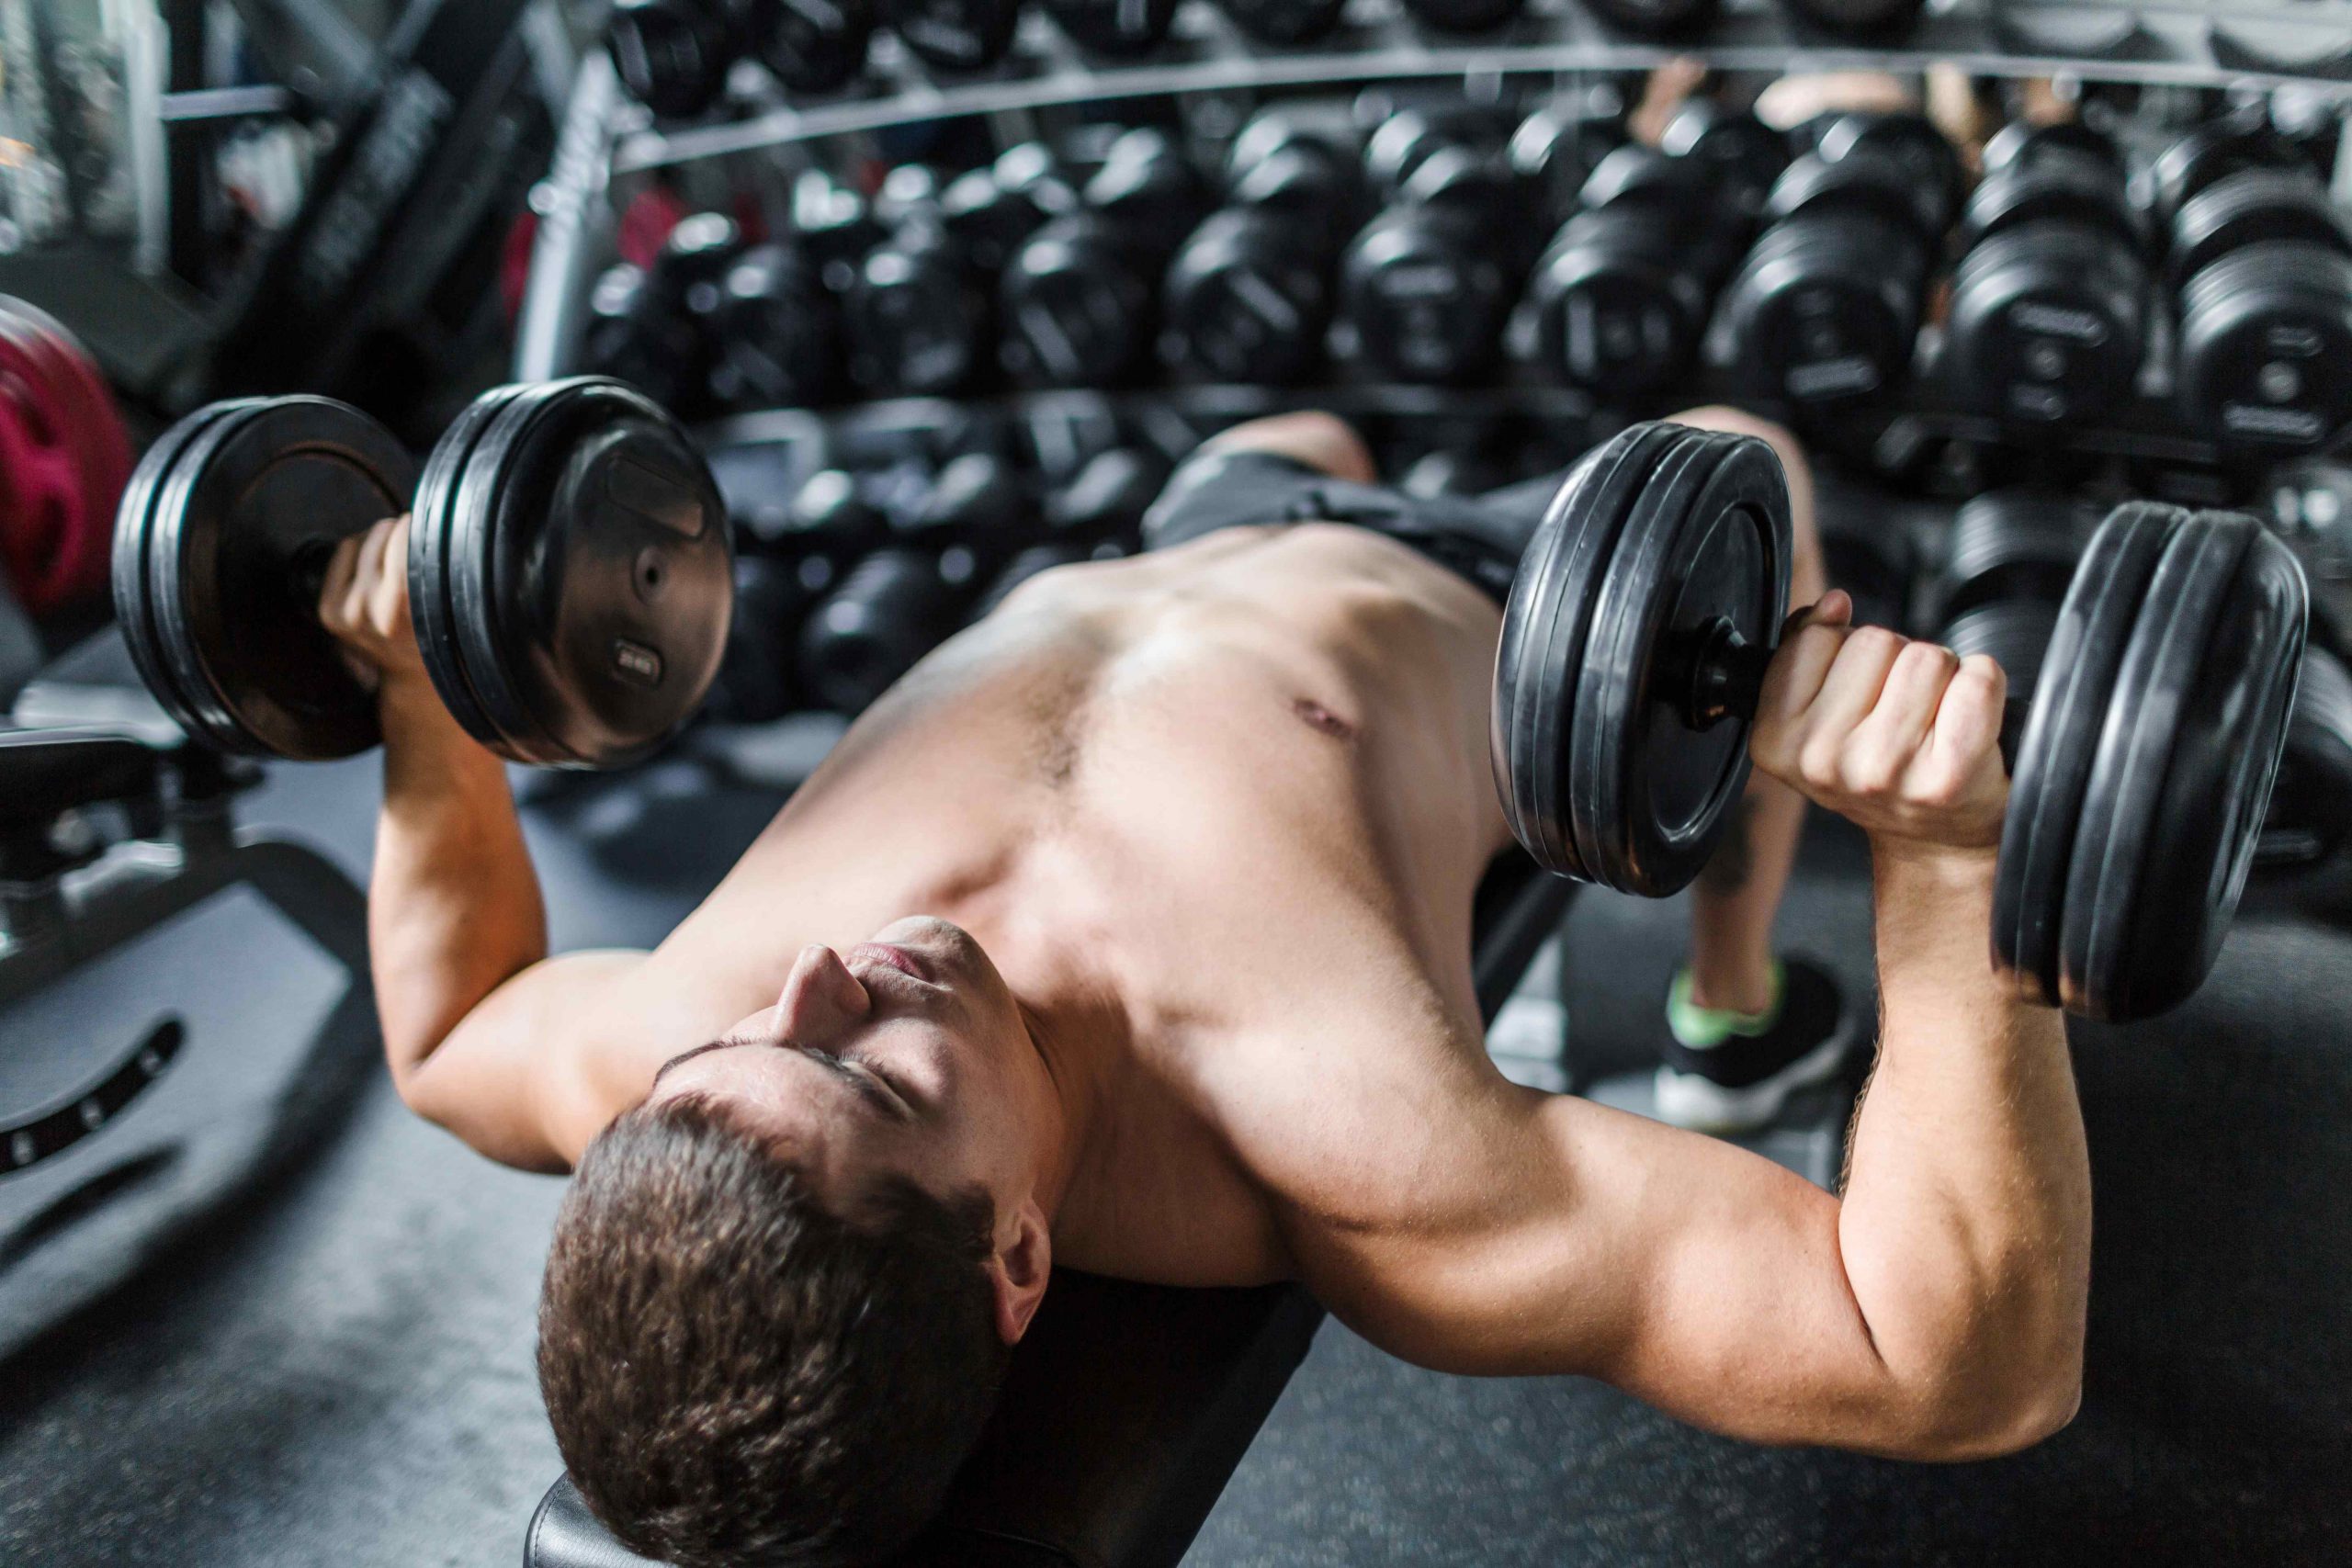 Man lays on exercise bench holding 2 dumbbells for strength training